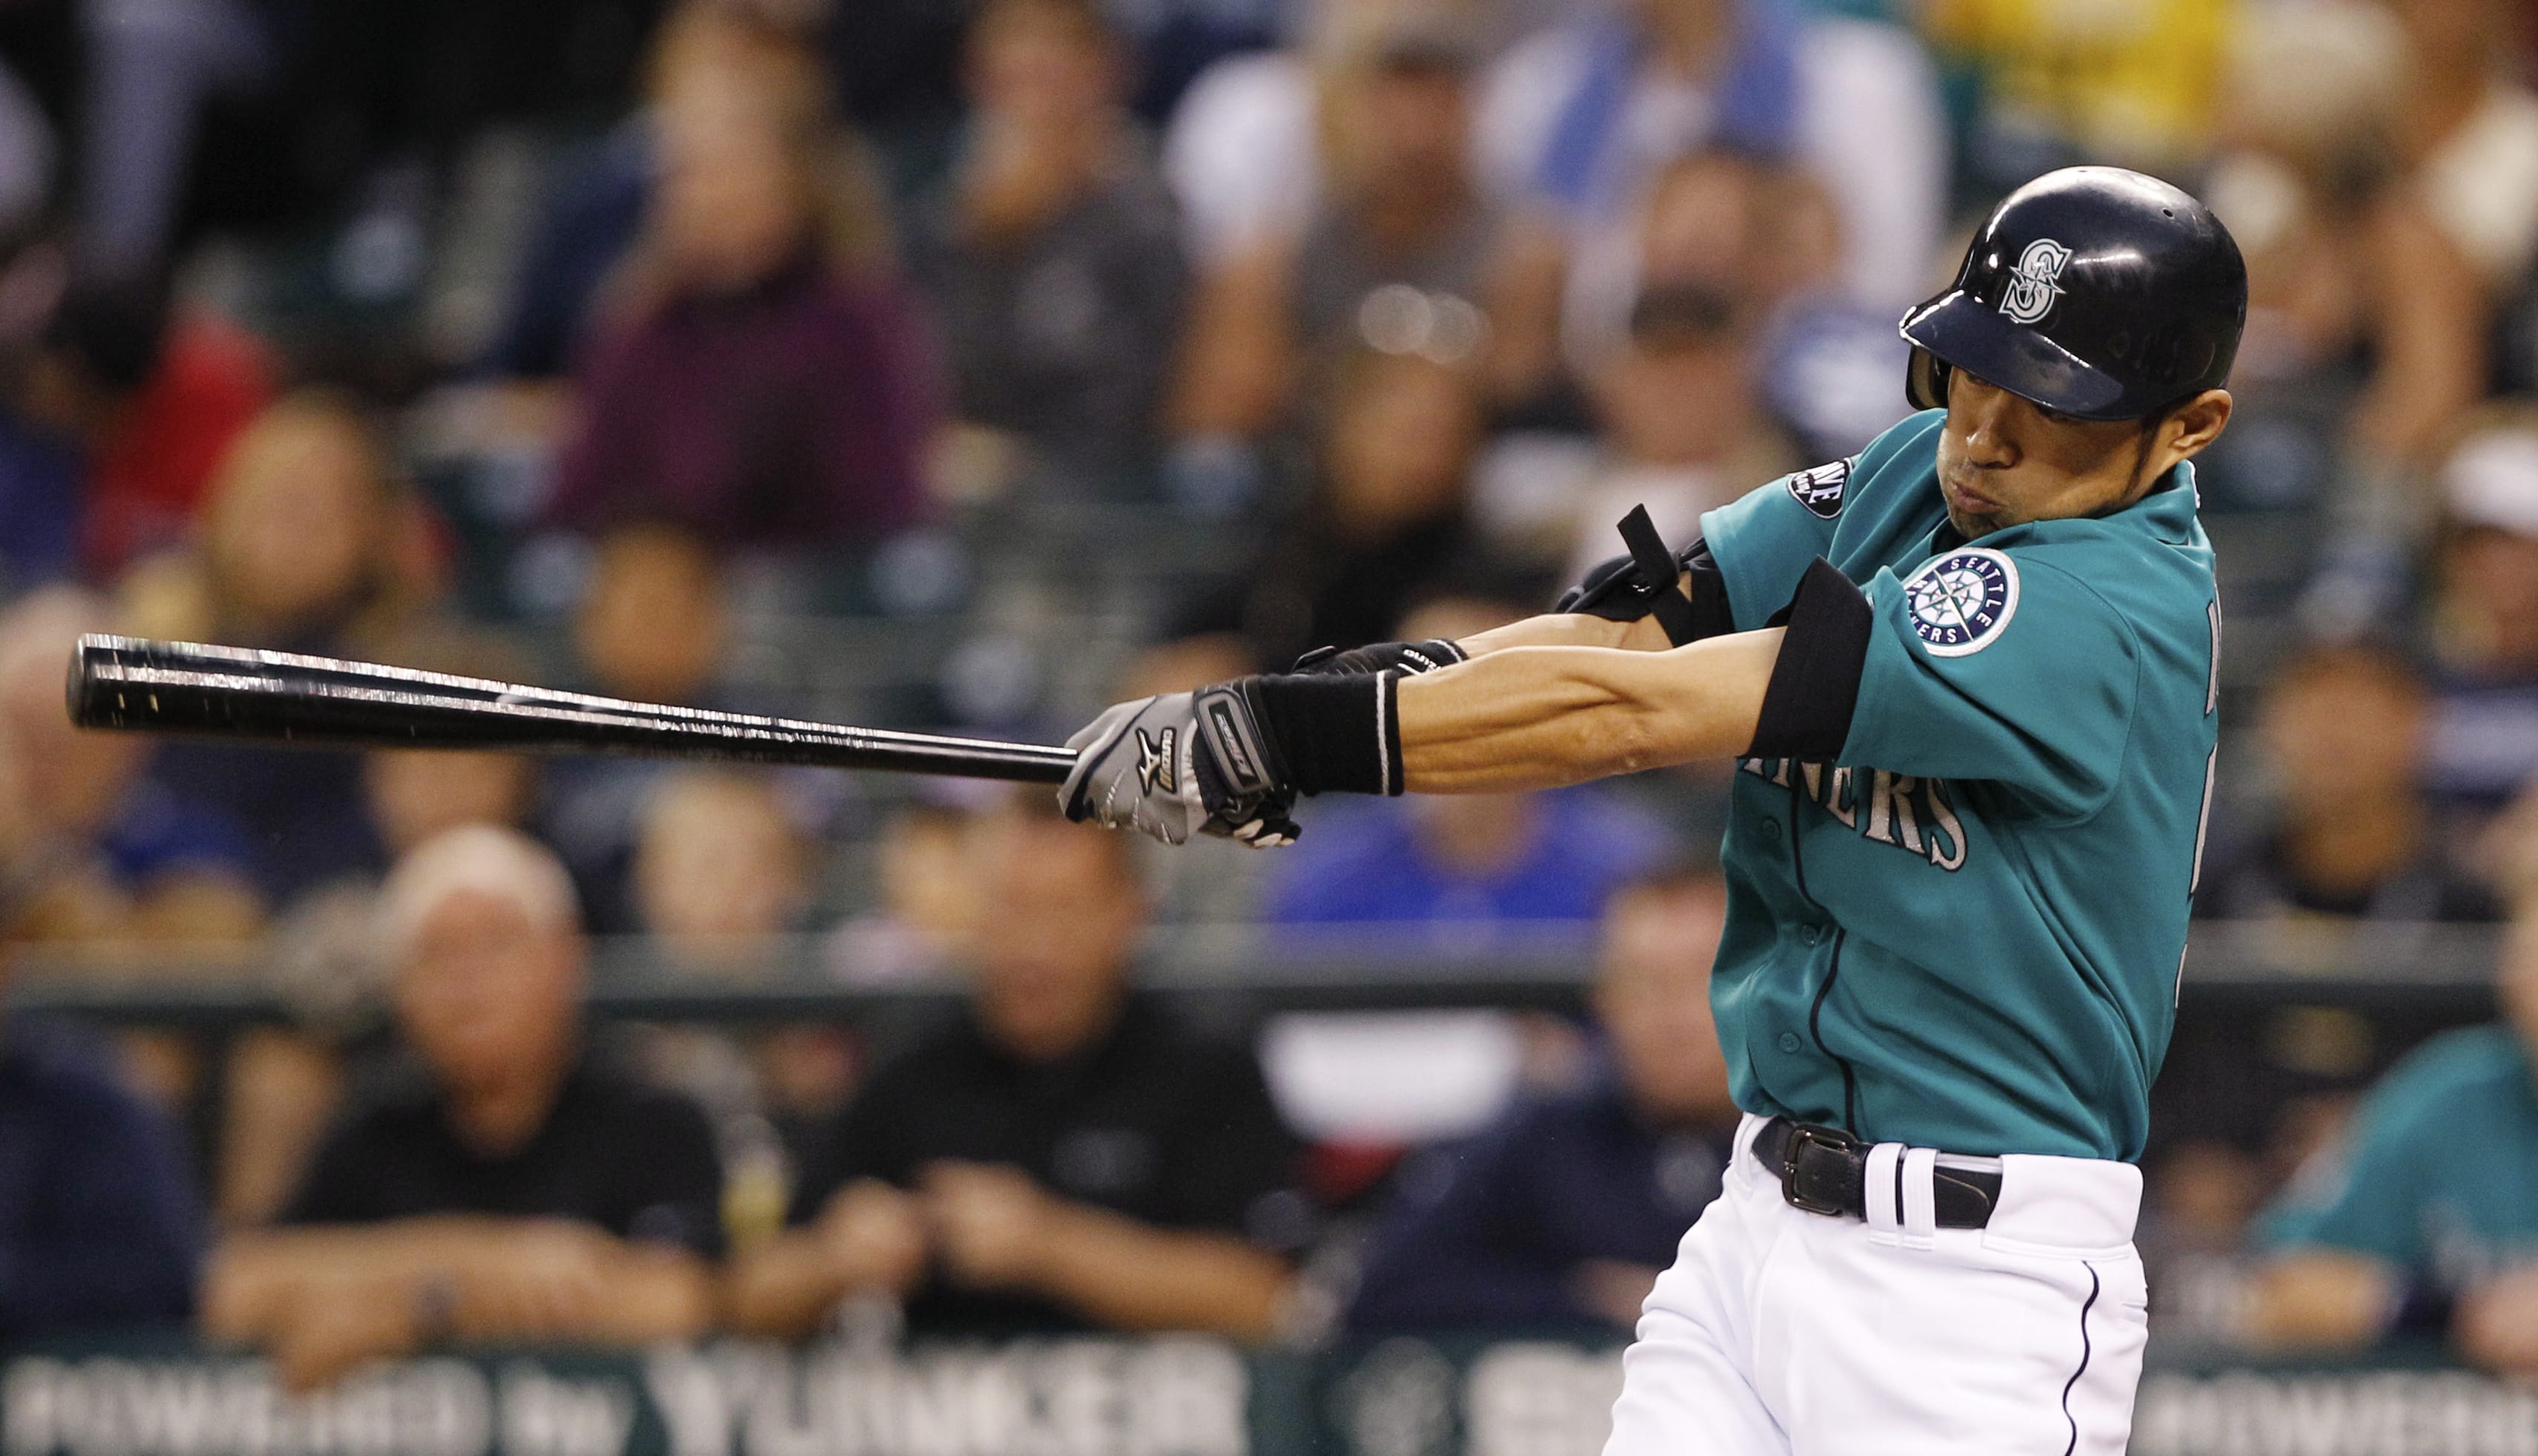 Ichiro Suzuki could be back in a Mariners uniform for 2018 according to reports by the USA Today on Monday, March 5, 2018. The free agent played with the Florida Marlins the last three seasons. He last played for the Mariners in 2012.